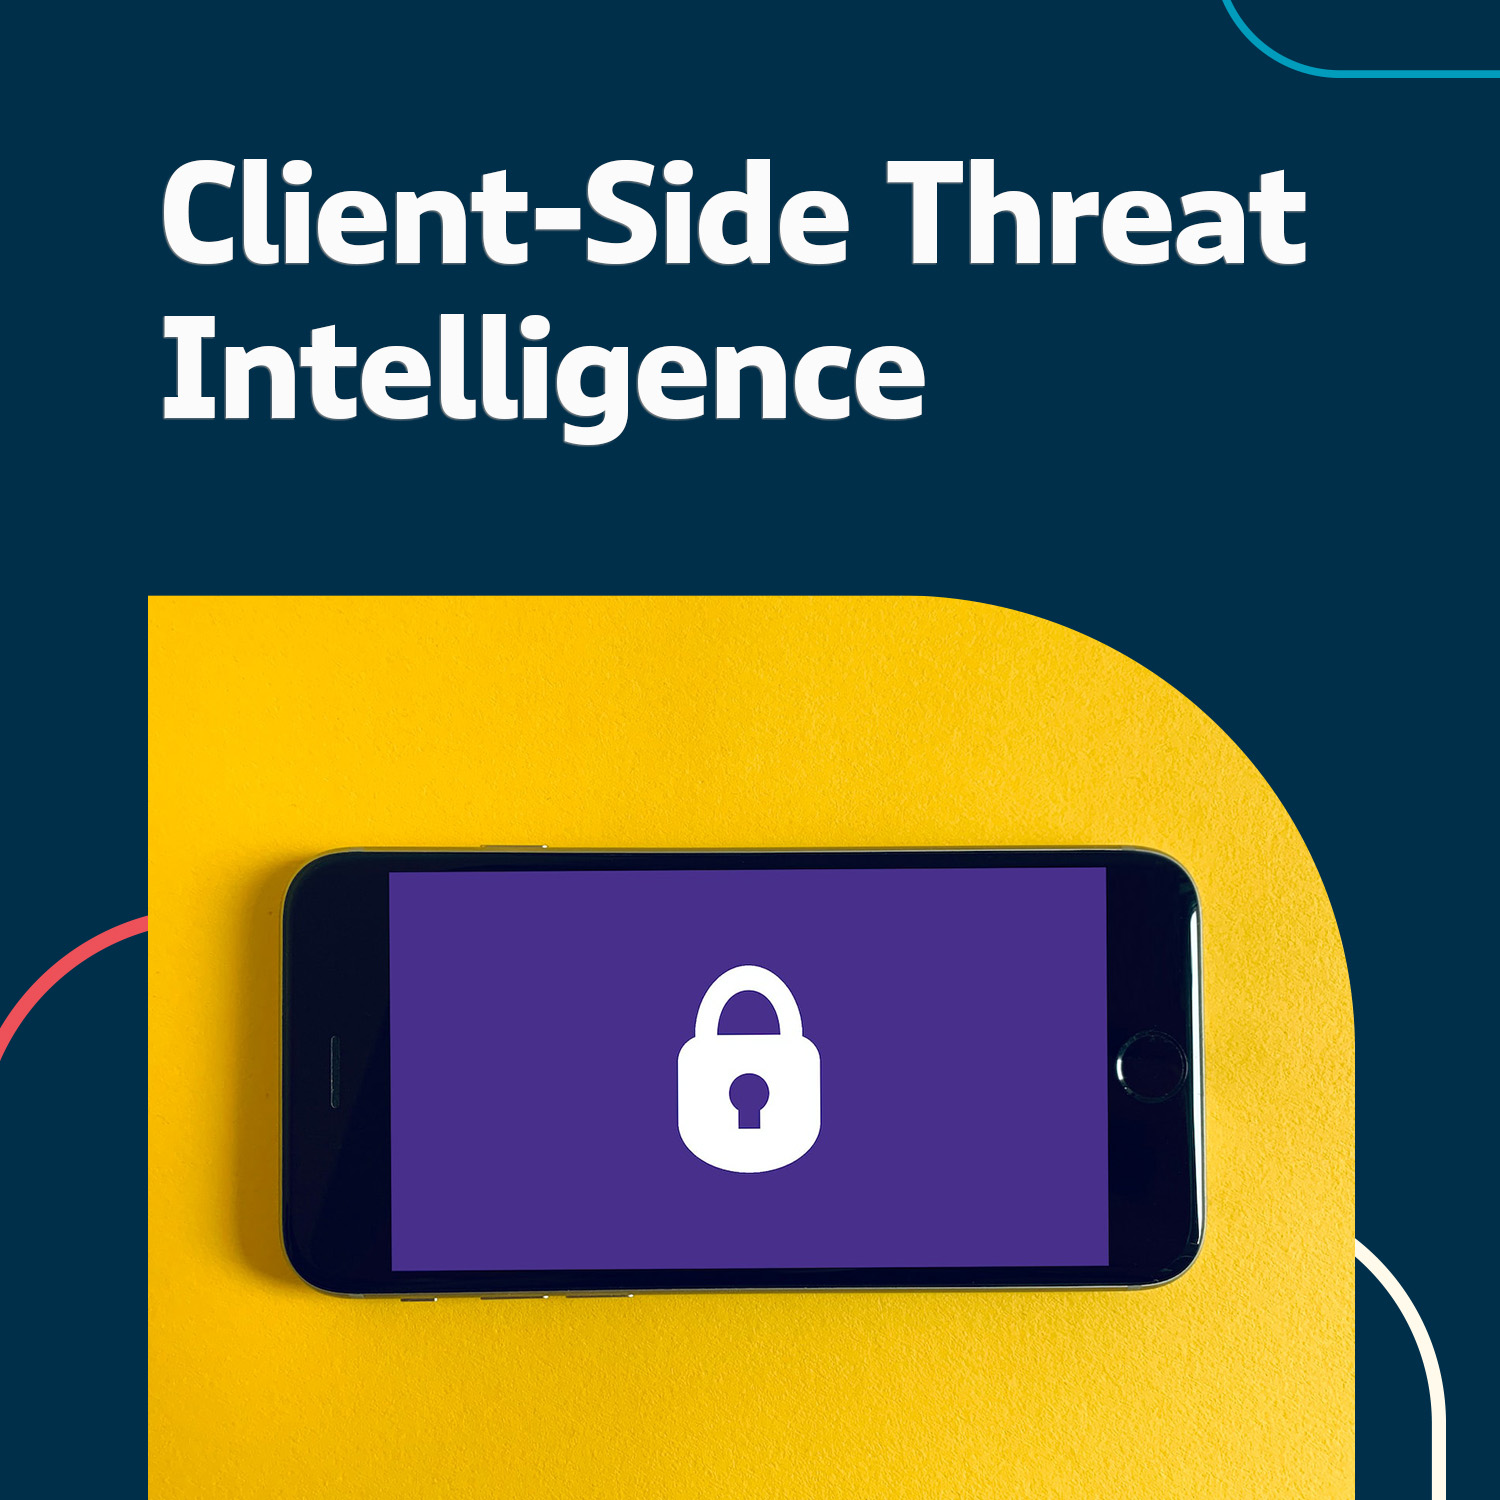 Client-Side Threat Intelligence